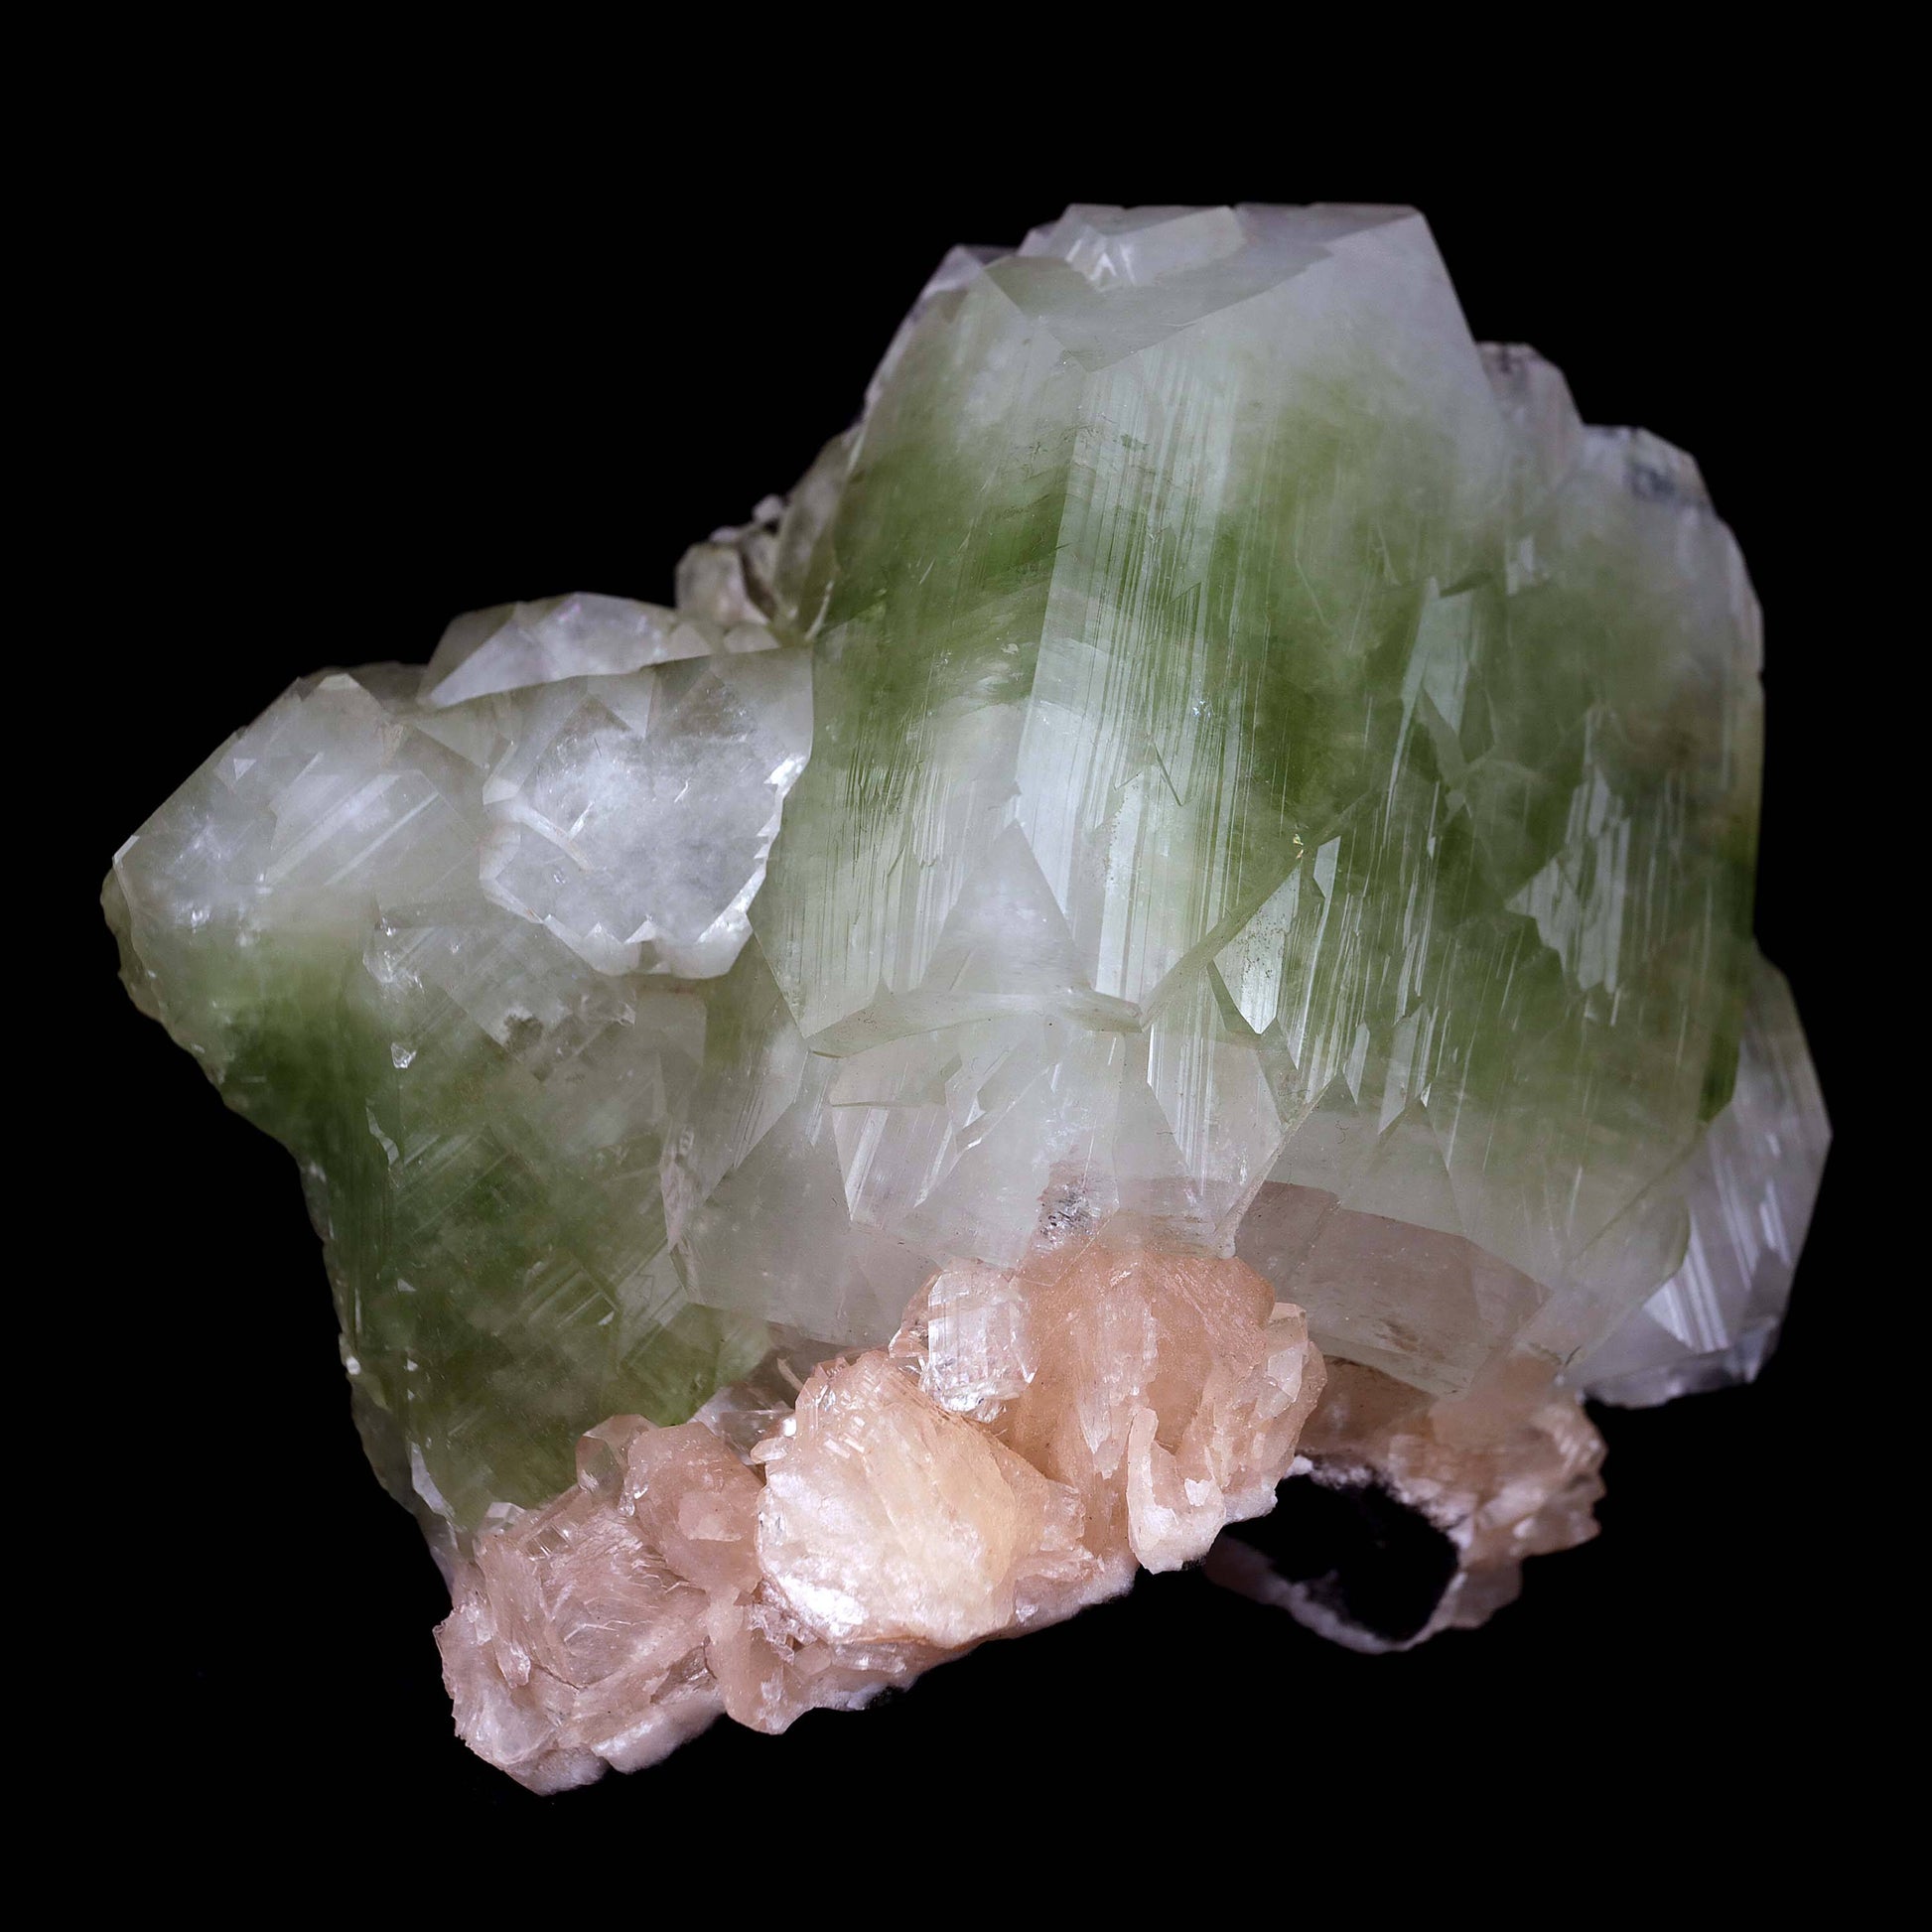 Green Apophyllite Cube with Stilbite Natural Mineral Specimen # B 448…  https://www.superbminerals.us/products/green-apophyllite-cube-with-stilbite-natural-mineral-specimen-b-4482  Features:This is a very fine, big, doubly terminated, glossy and translucent bicolored green fluorapophyllite crystal that has been tastefully set on a matrix of aged basalt and quartz druse. A few beautiful, ivory-colored stilbite crystals encircle the base. 